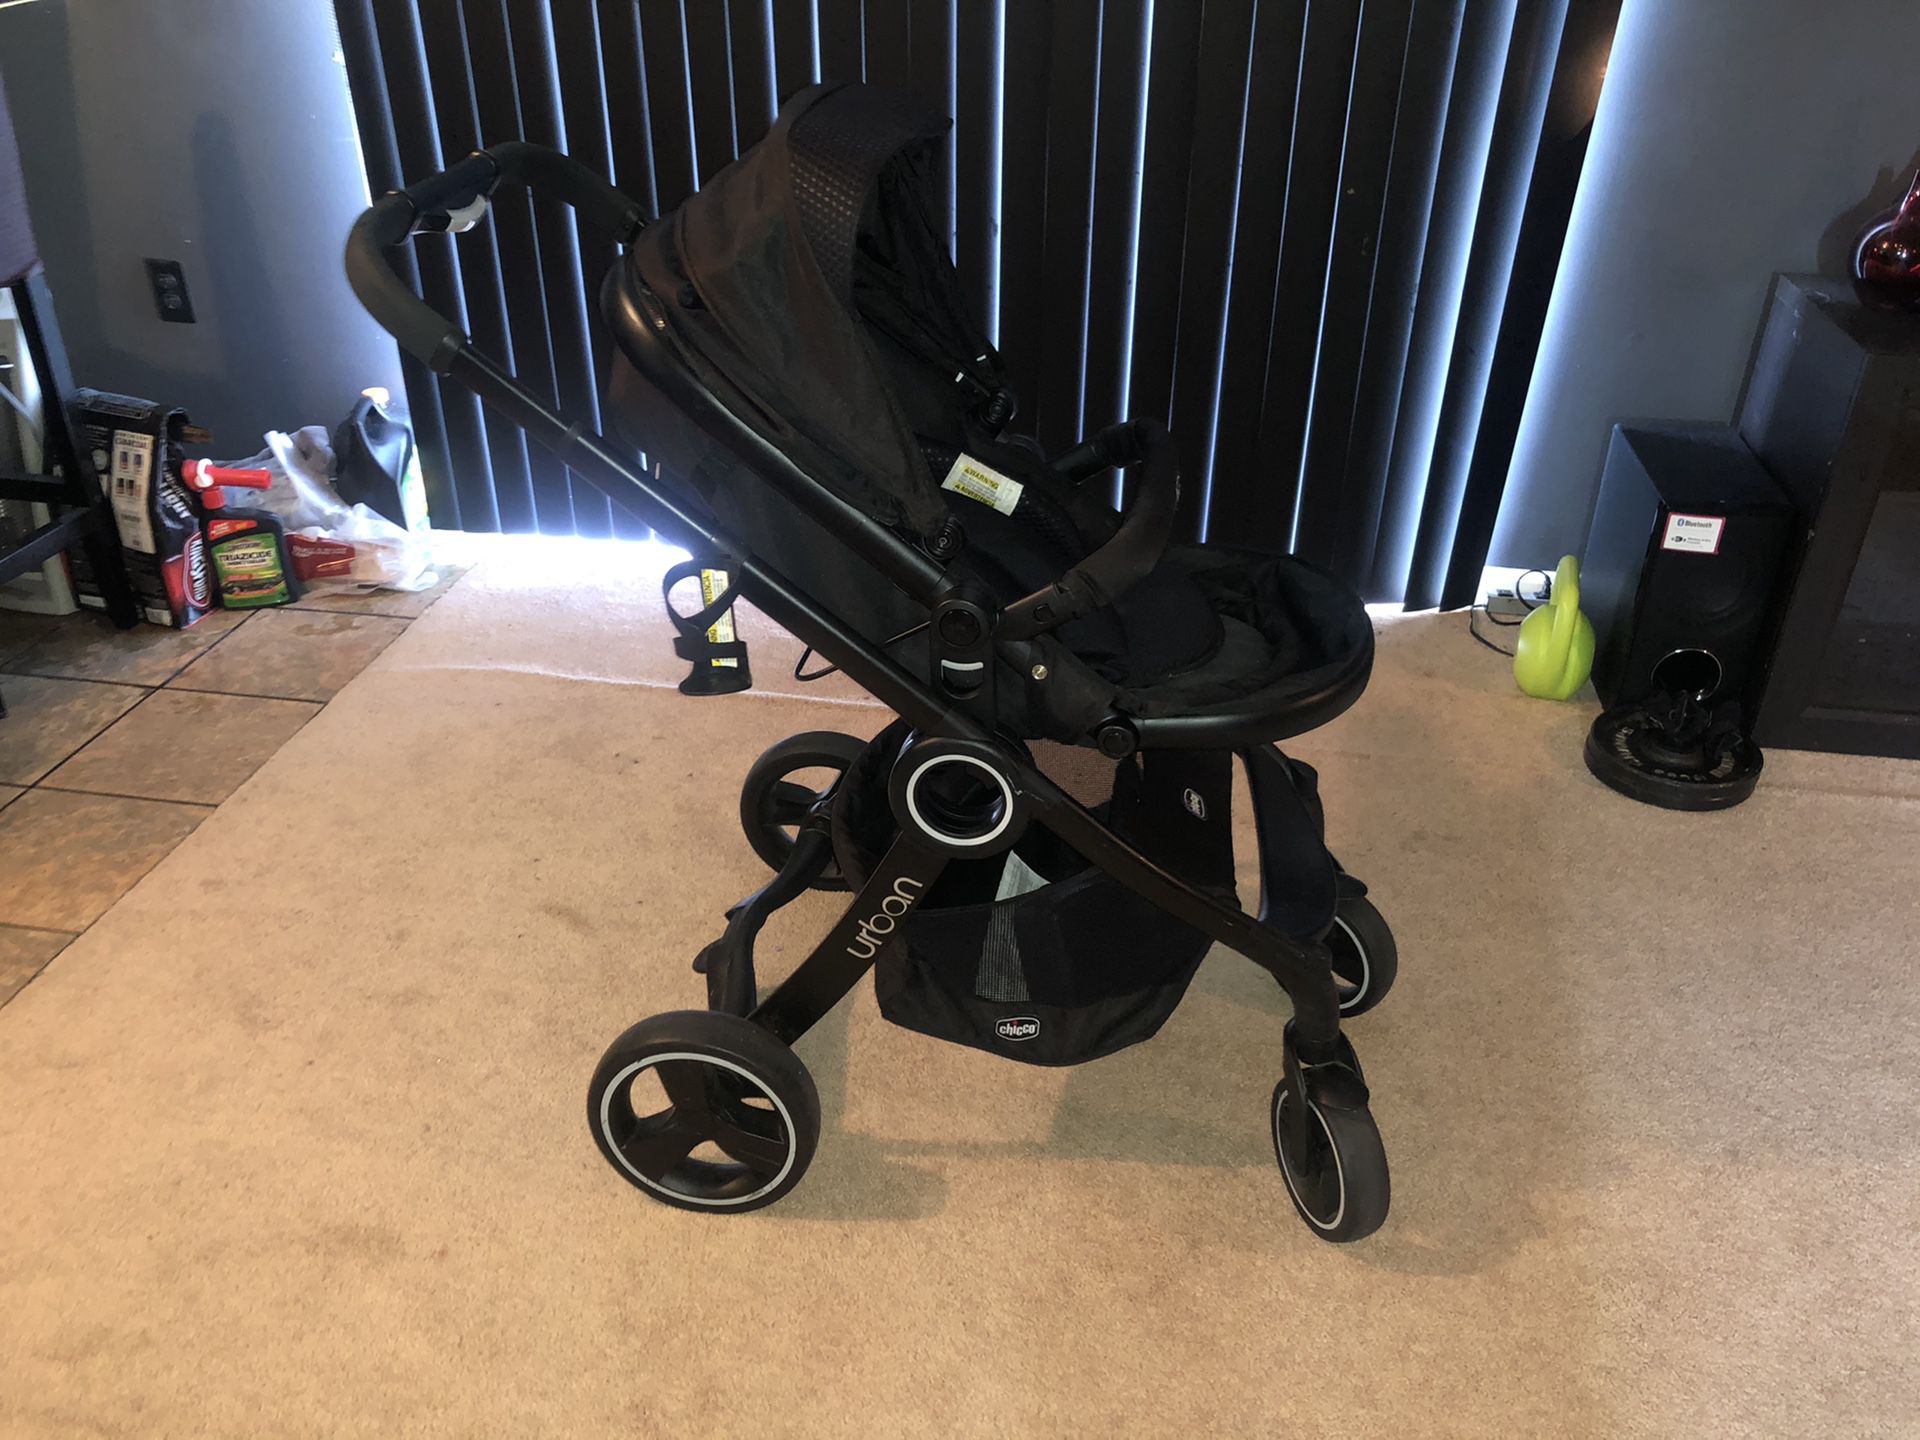 Chicco Urban transitional stroller in great condition.